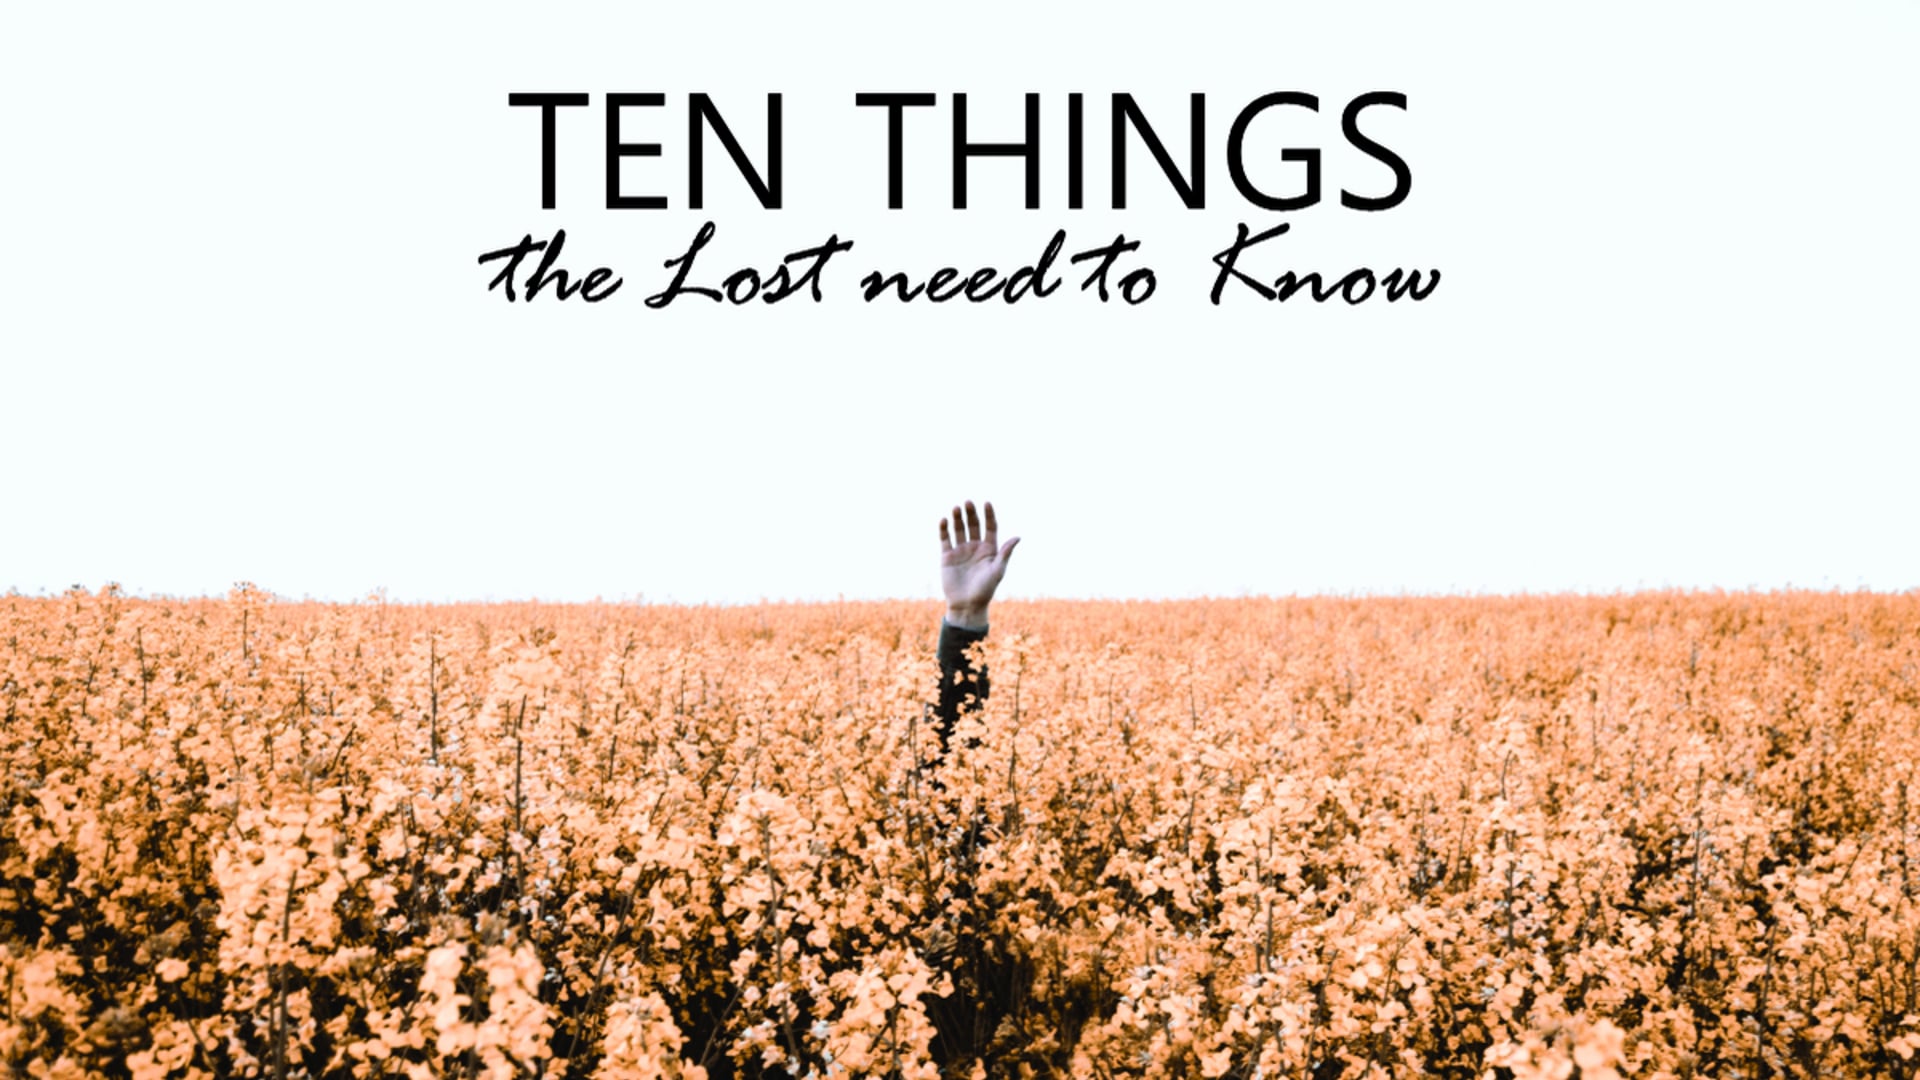 03.16.22 - Ten Things the Lost Need To Know - Jesus